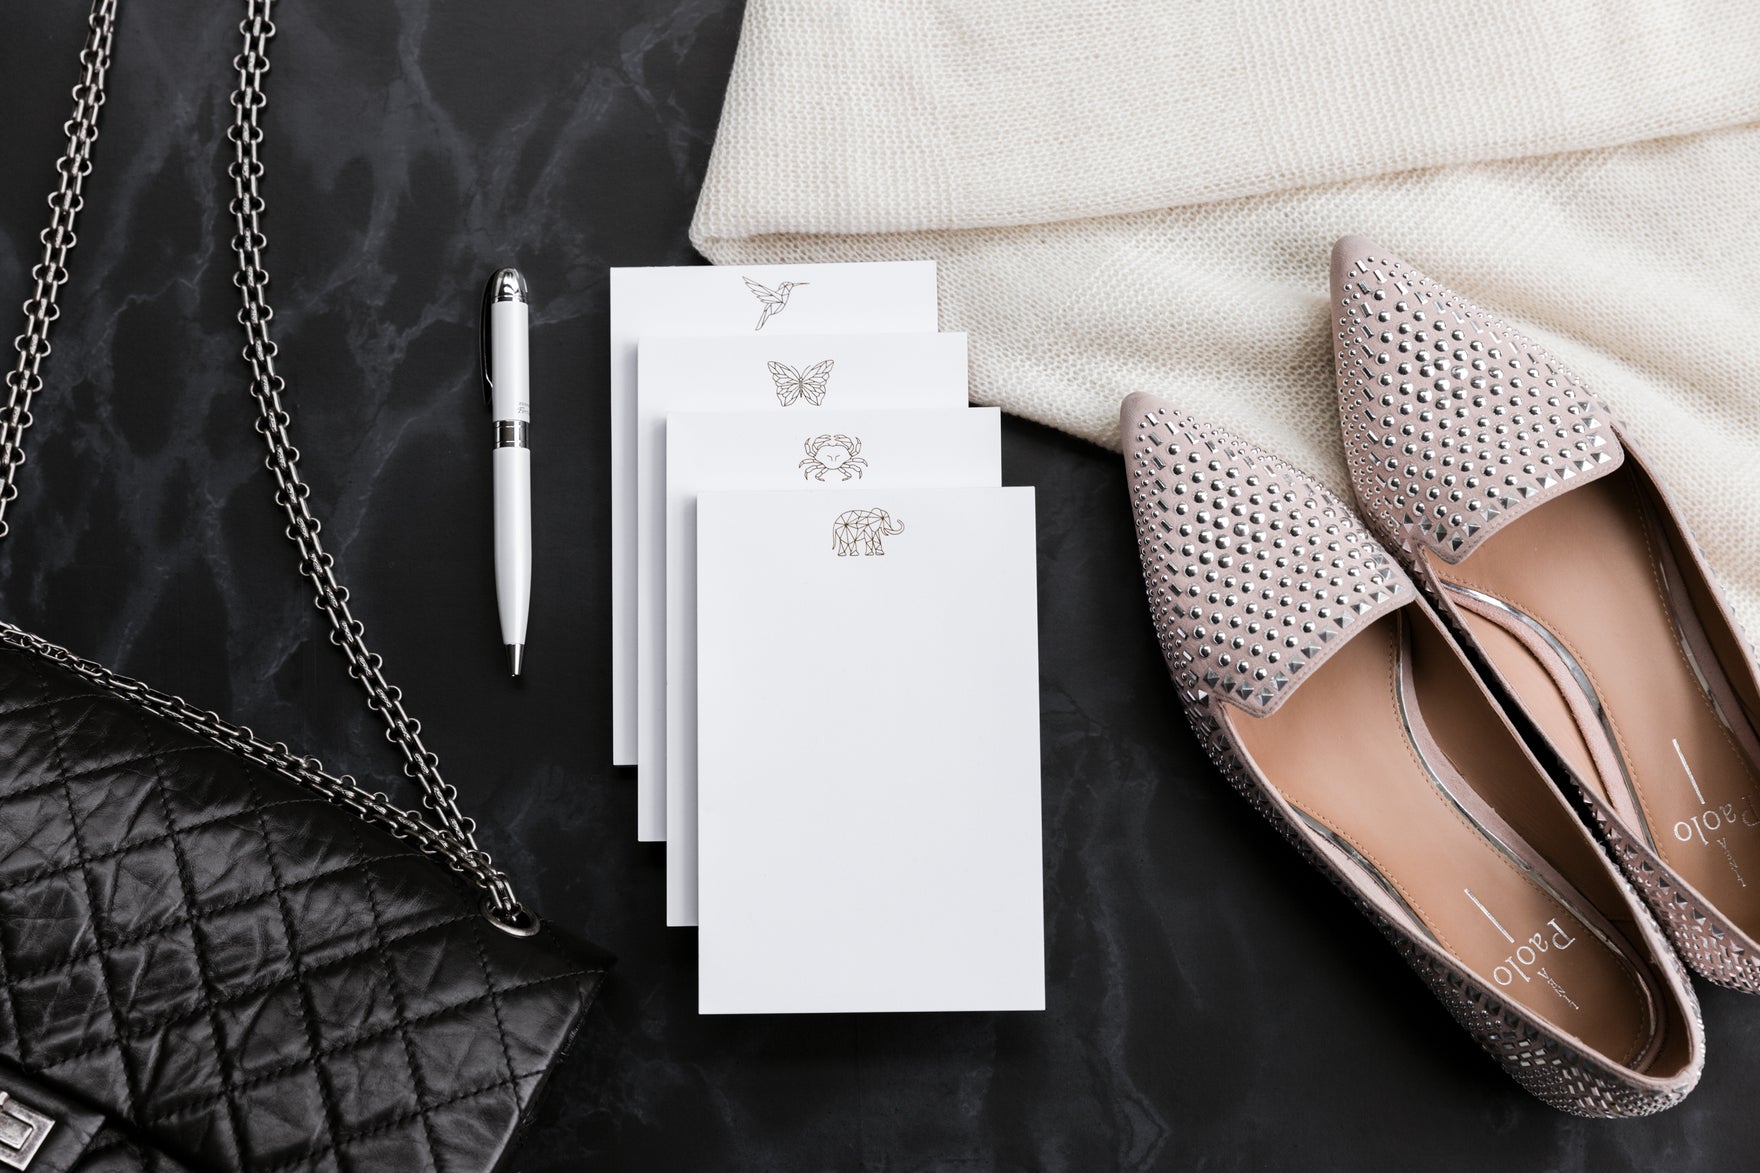 A quilted black handbag, a pen, gold-foil print notepads, and a pair of elegant flats sit on a black table.